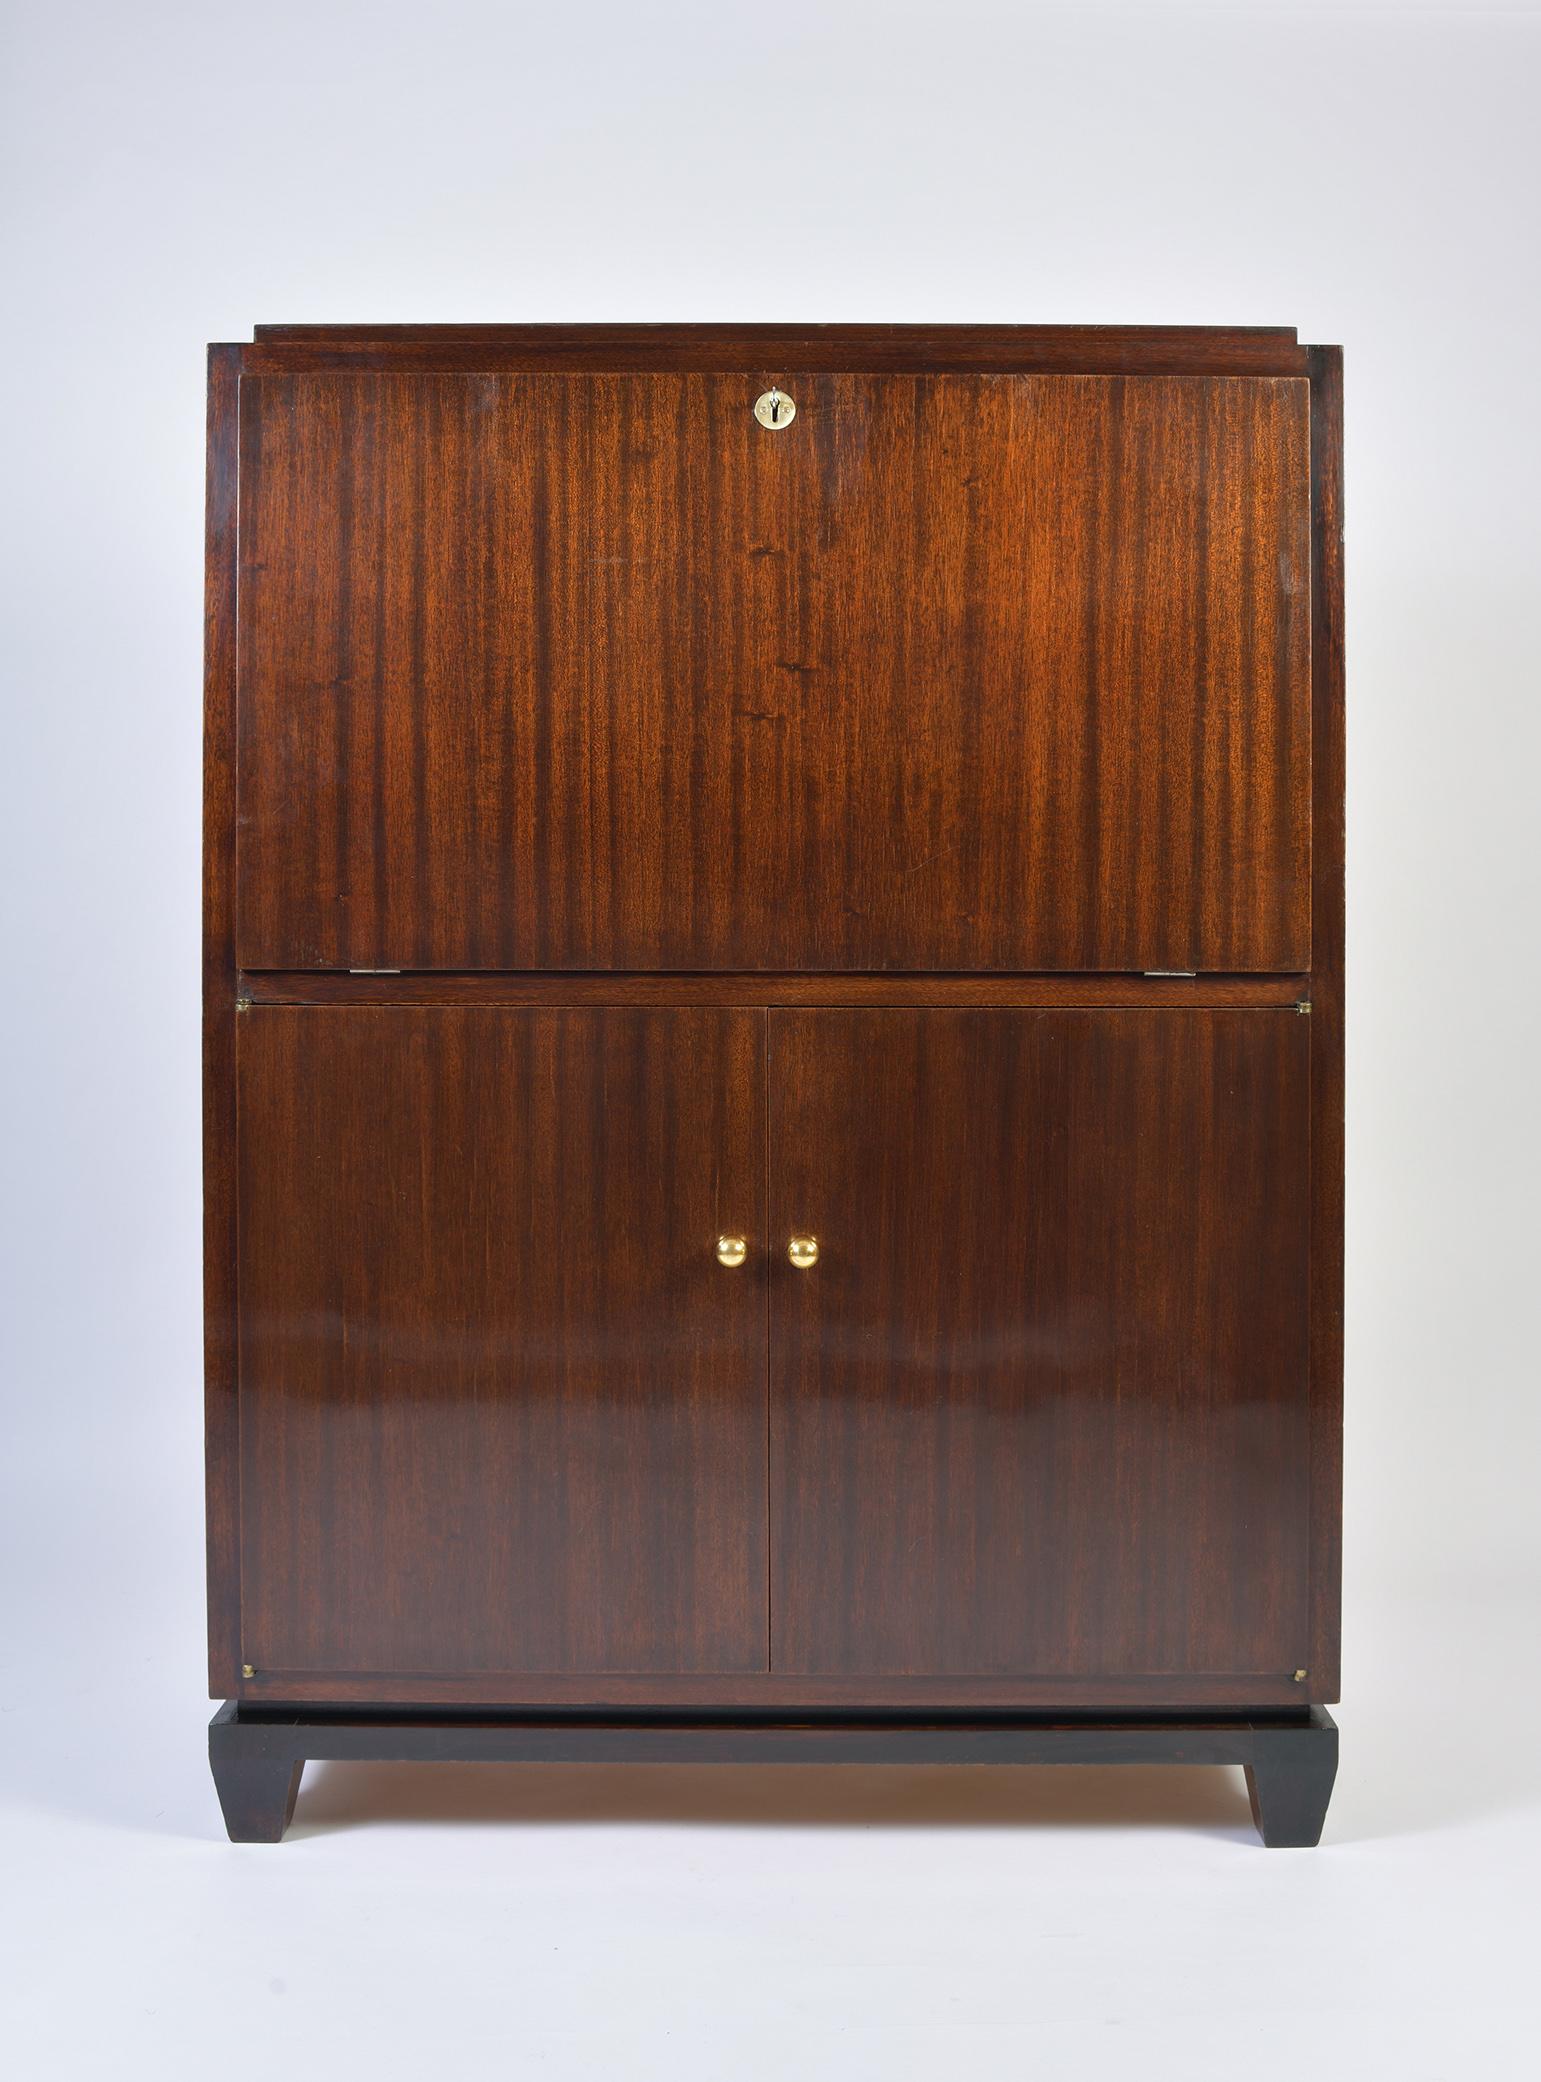 An Art Deco mahogany cabinet, the top section opening with an abattant which can used either as a secretaire or as a bar, locked with a brass key hole and its key in working order, the lower section opening with two doors with solid brass knobs,